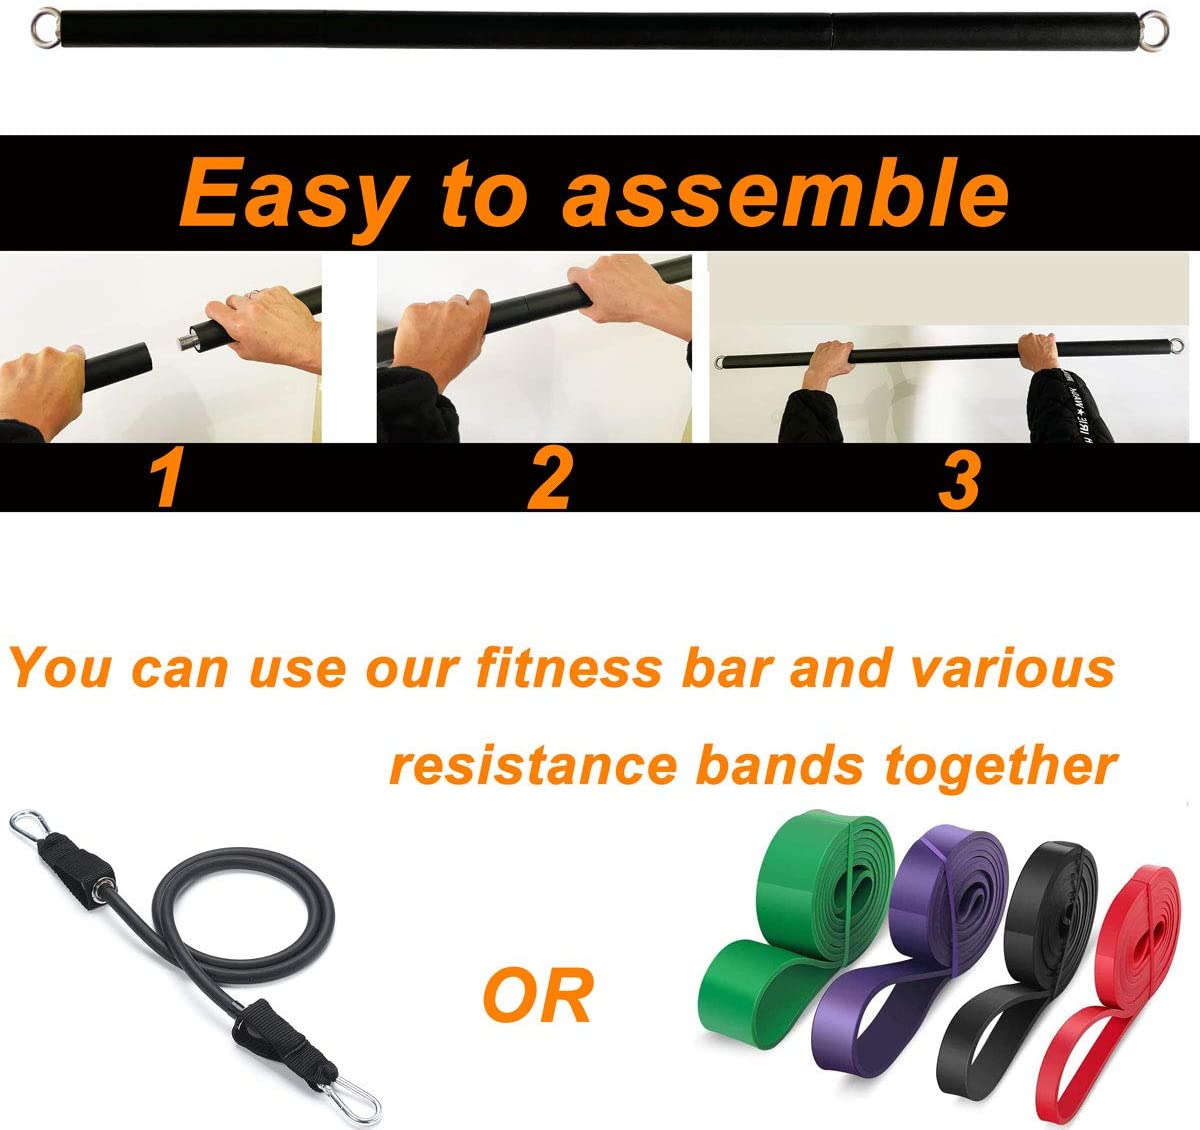 Workout Bar Fits All Resistance Bands with Clip Portable Resistance Bands Exercise Bar for Fitness Home Gym Workout Full Body